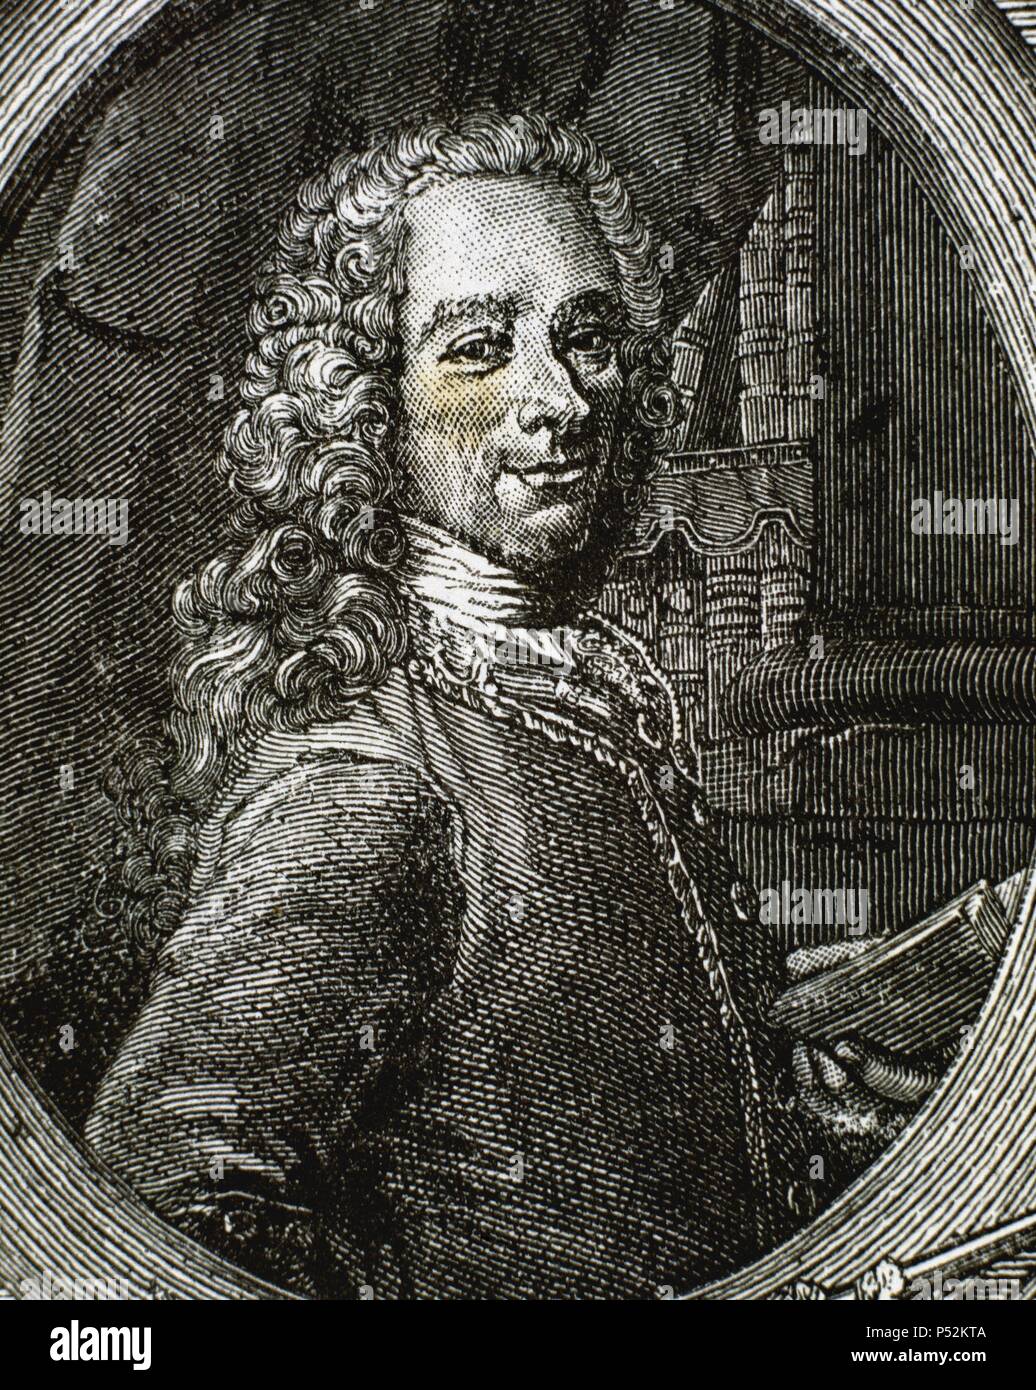 Voltaire (1694-1778). French Enlightenment writer, historian, and philosopher. Portrait. Engraving by Etienne Fiquet (1719-1797). Stock Photo